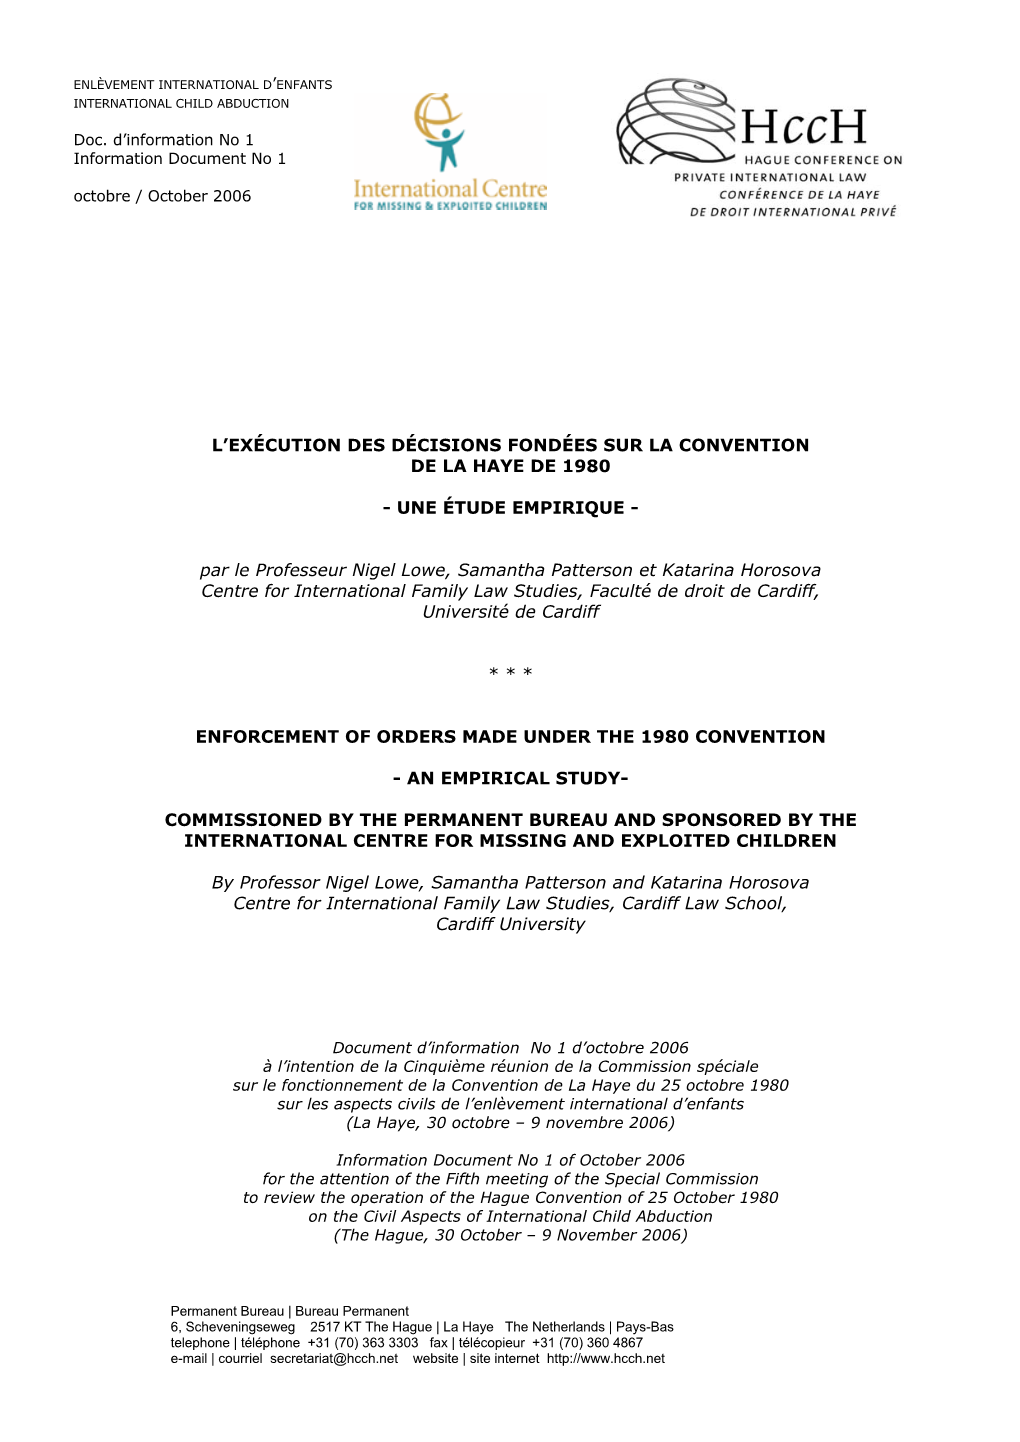 Information Document of October 2006